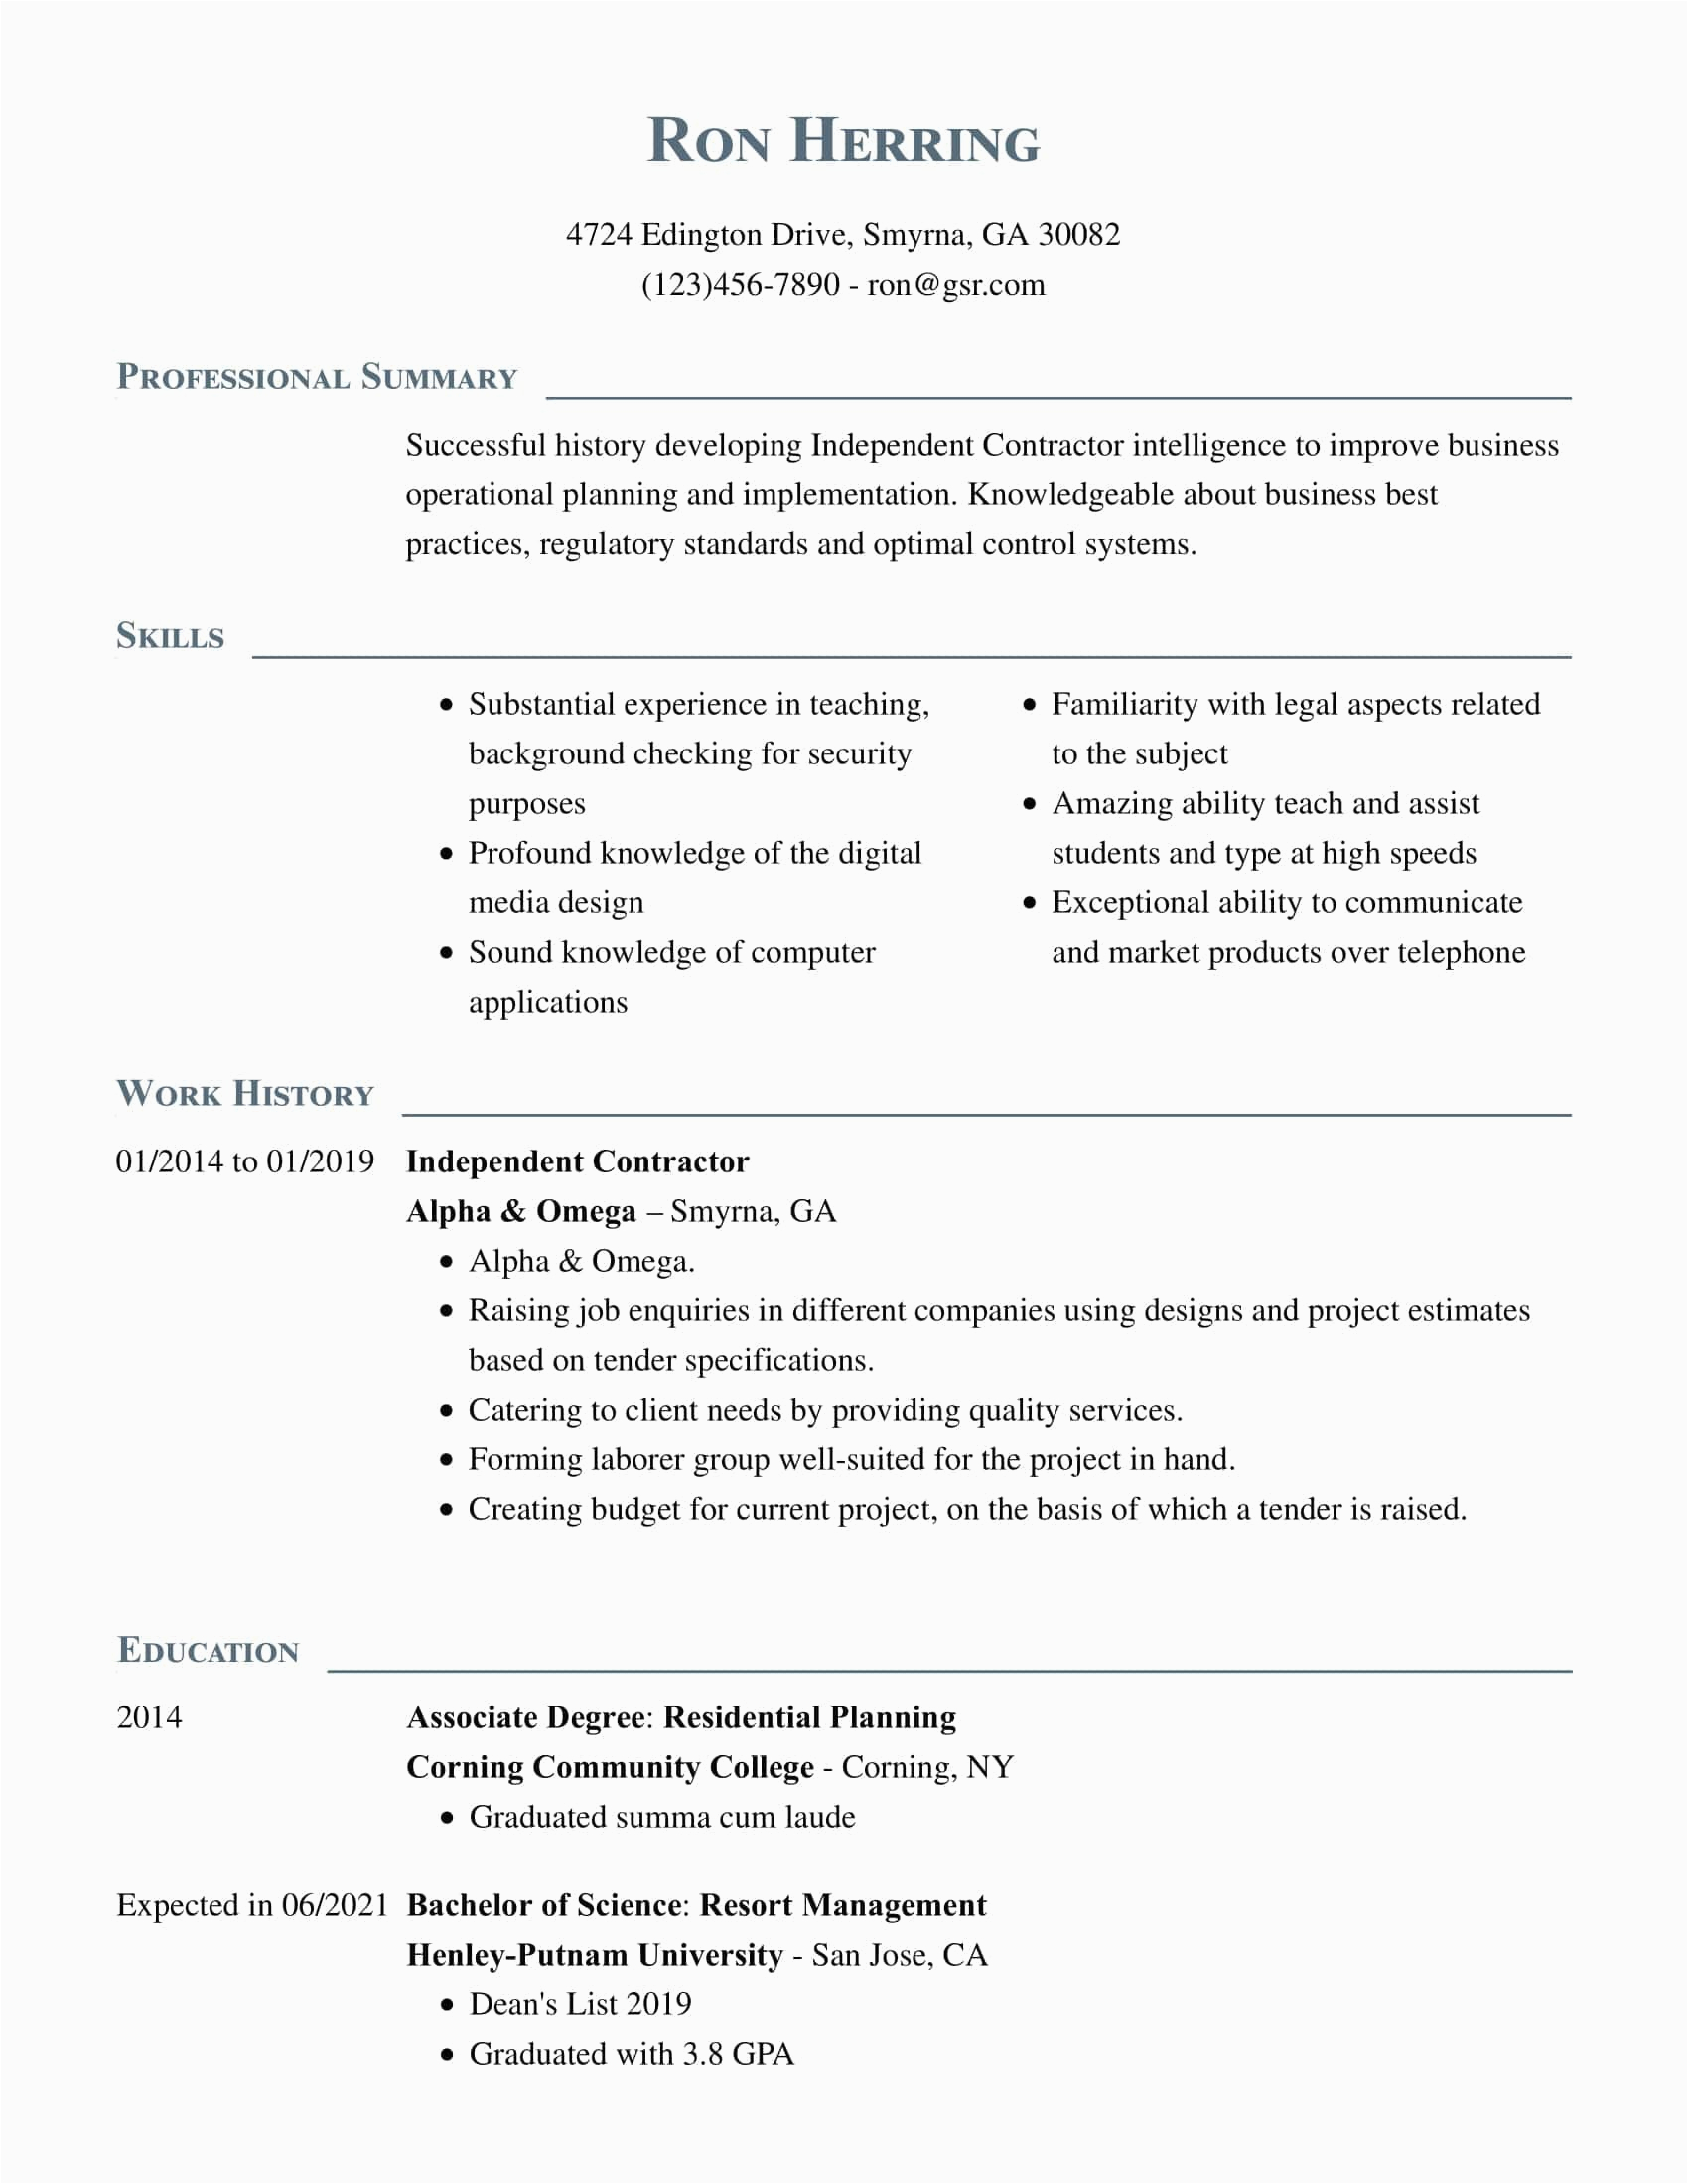 Sample Resume for Job within Same Company Resume format Multiple Jobs Same Pany why is Simple Work Resume